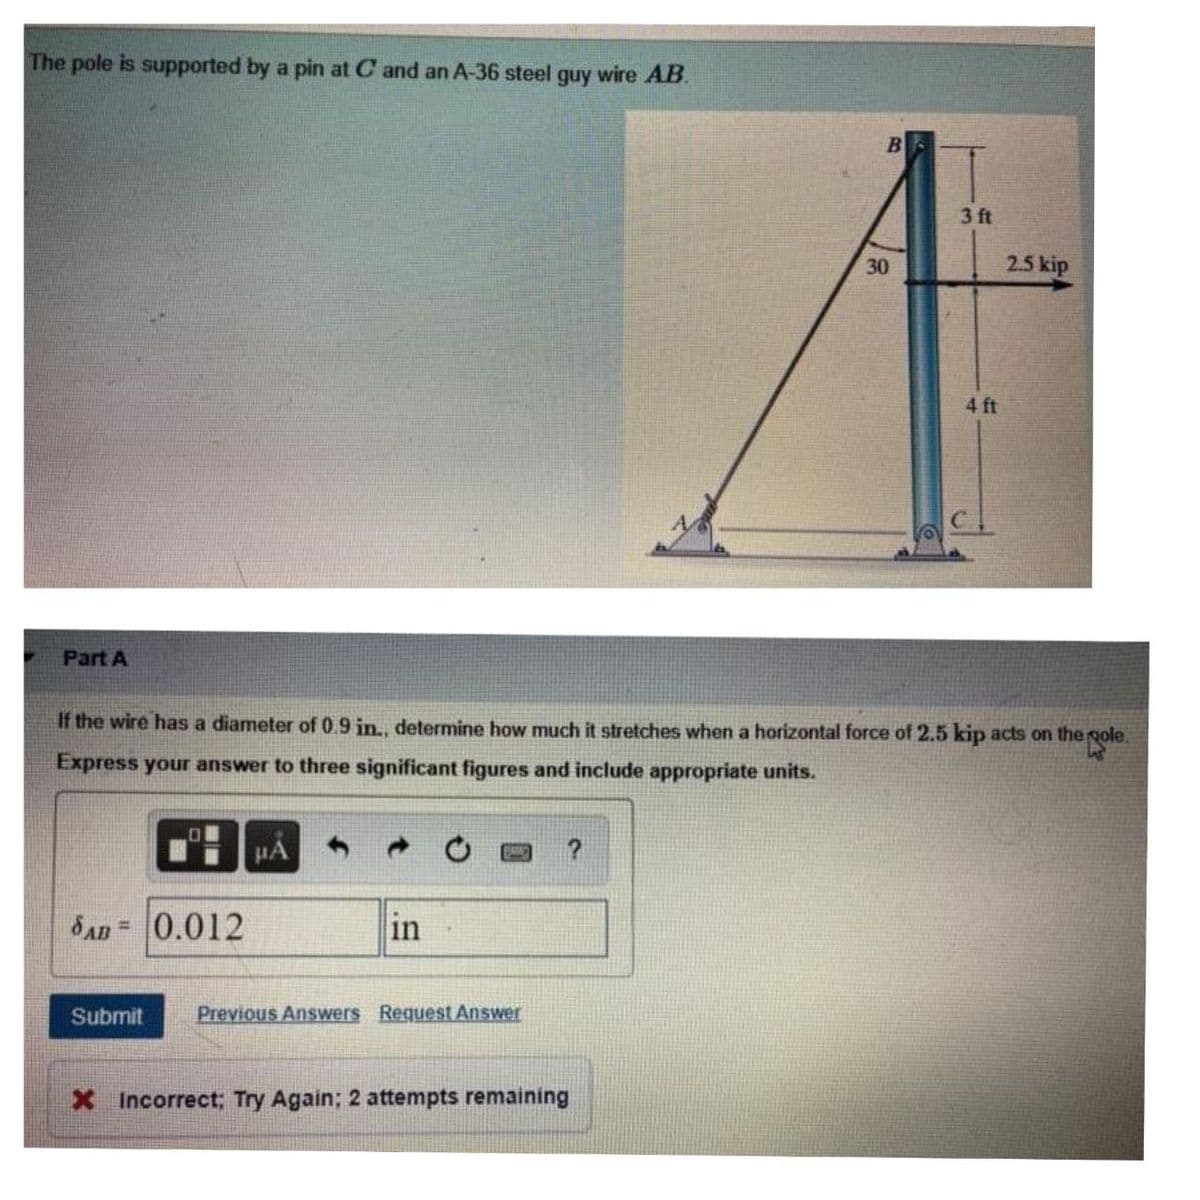 The pole is supported by a pin at C and an A-36 steel guy wire AB
Part A
01
SAB= 0.012
Submit
μA
If the wire has a diameter of 0.9 in., determine how much it stretches when a horizontal force of 2.5 kip acts on the pole.
Express your answer to three significant figures and include appropriate units.
in
PRAC ?
Previous Answers Request Answer
B
X Incorrect; Try Again; 2 attempts remaining
30
3 ft
4 ft
2.5 kip